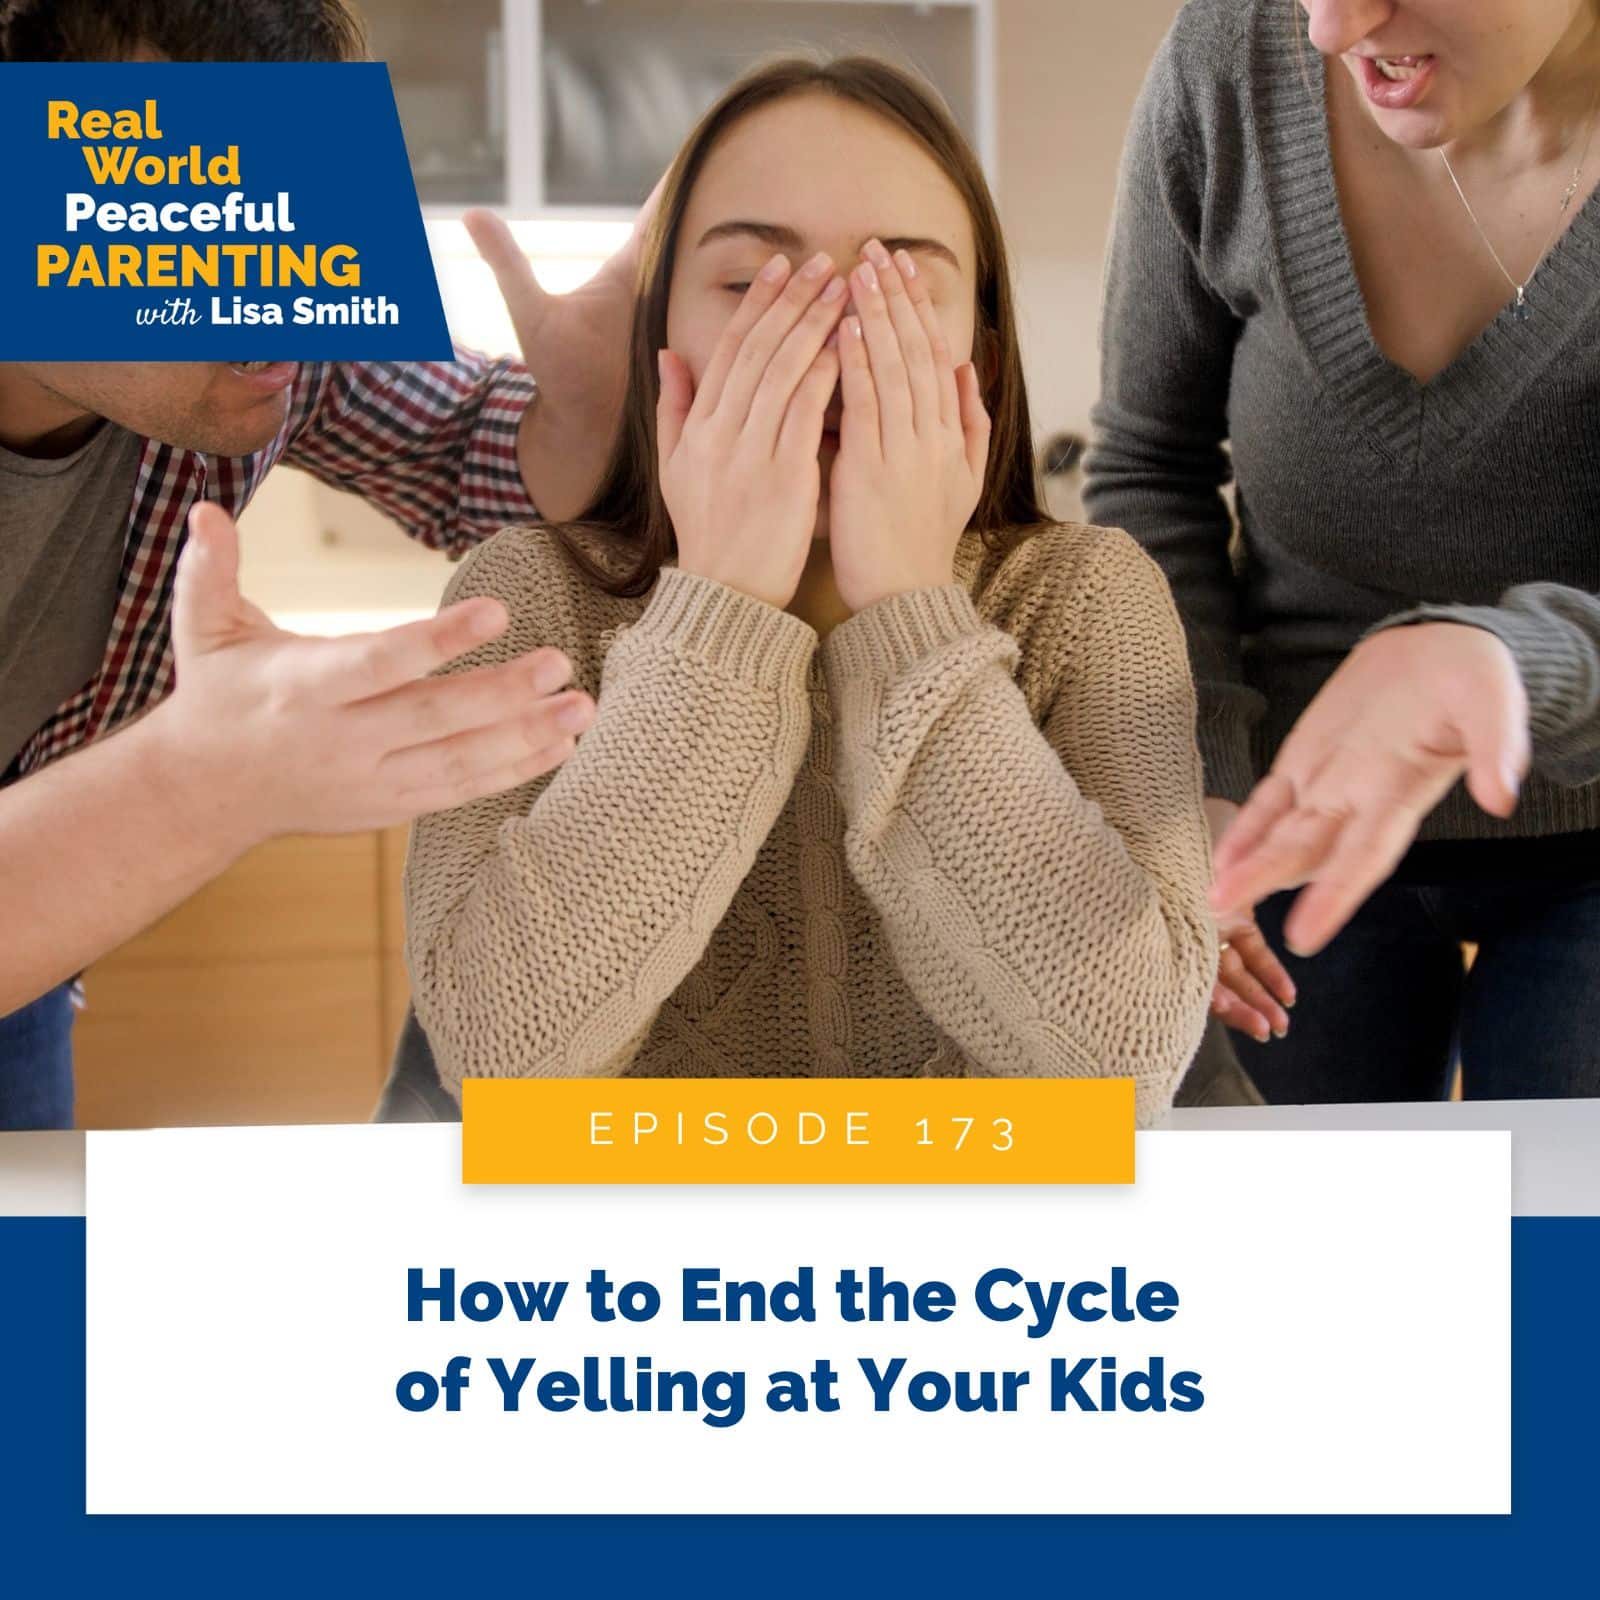 Real World Peaceful Parenting with Lisa Smith | How to End the Cycle of Yelling at Your Kids